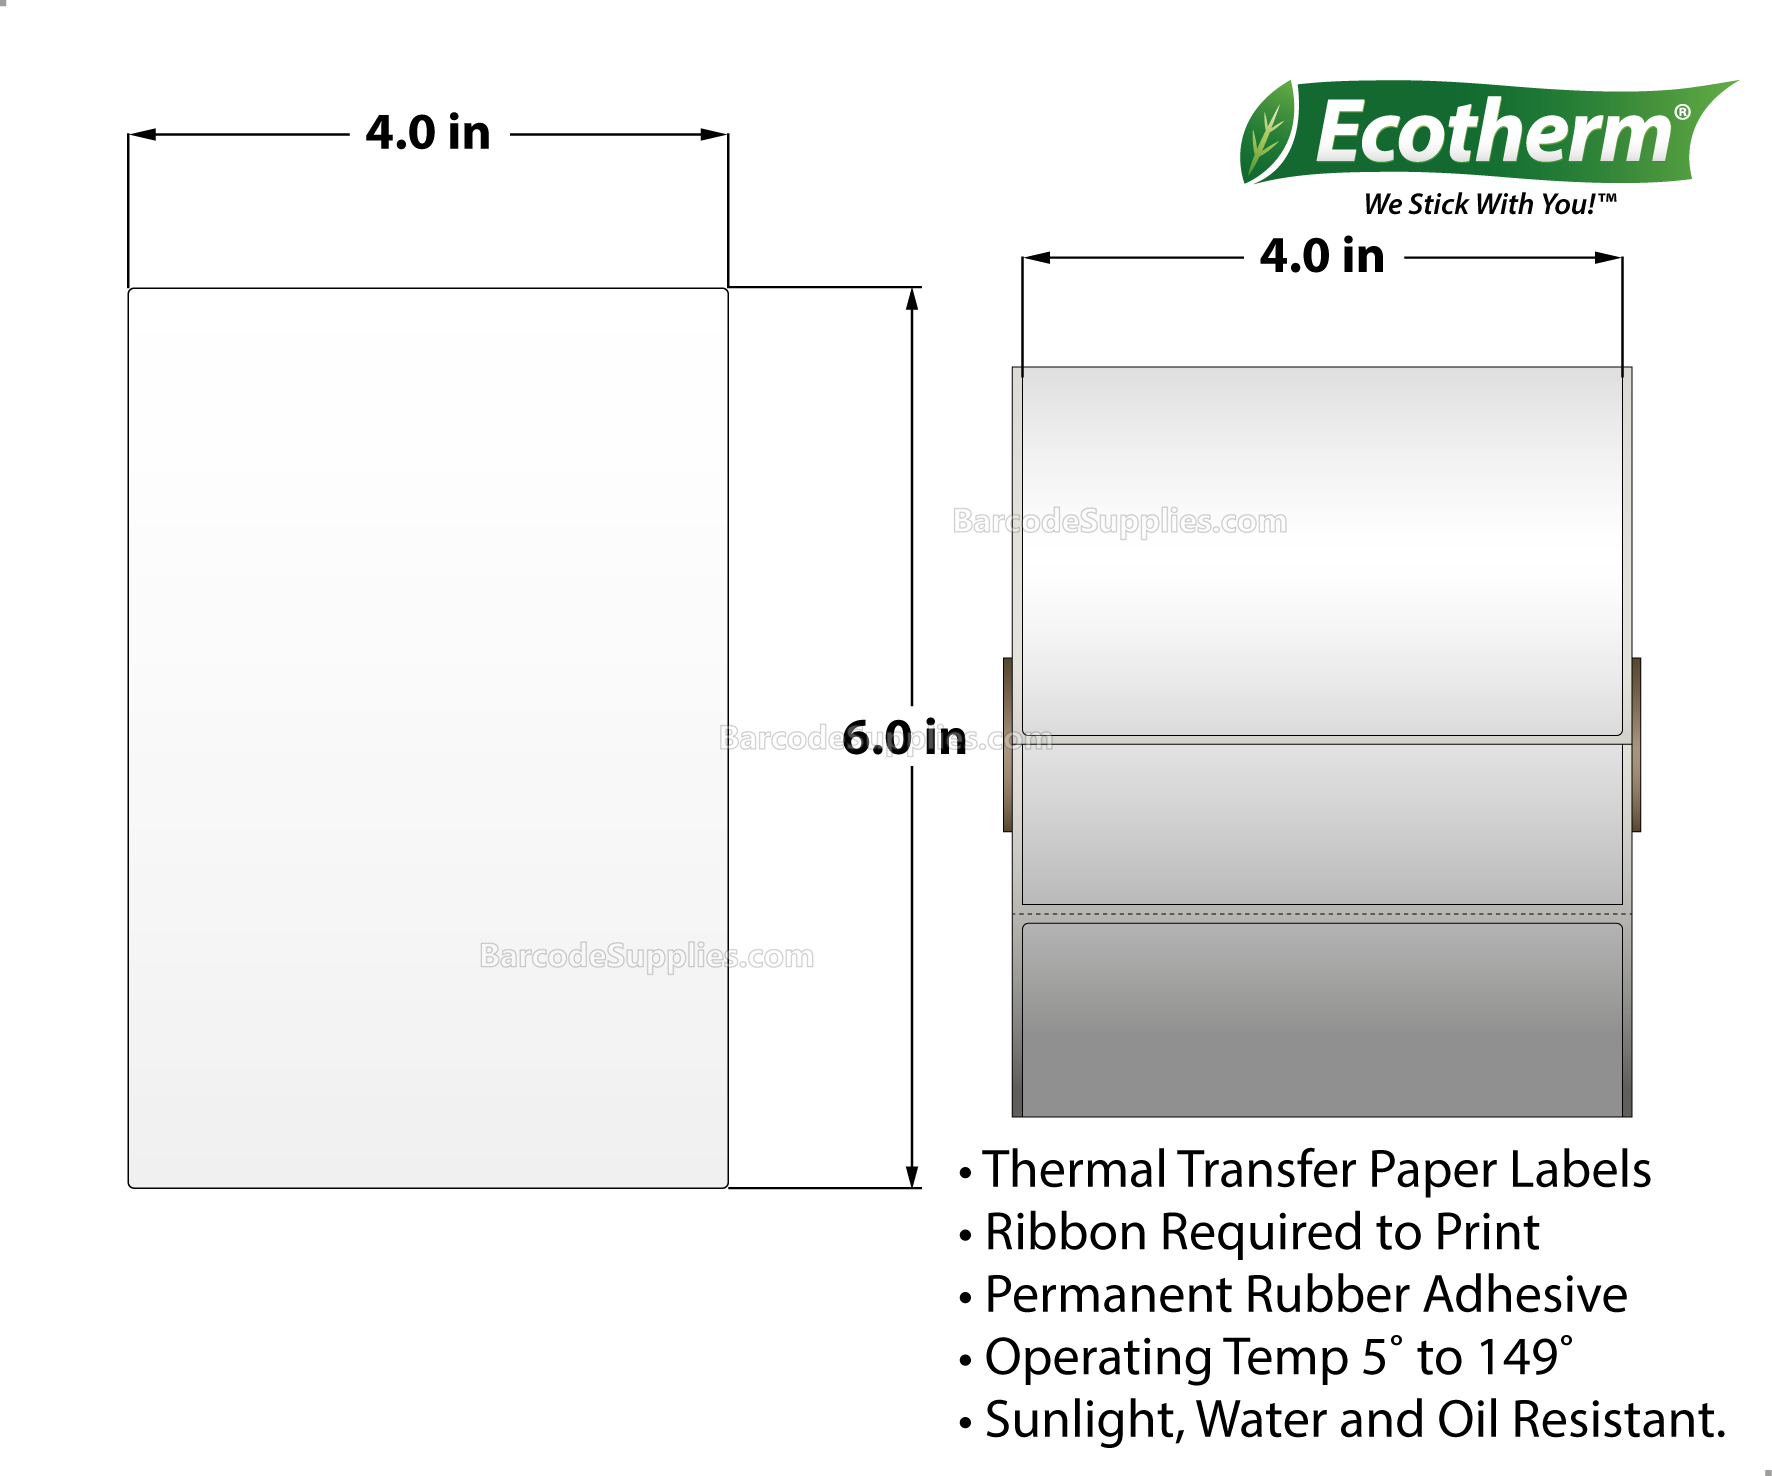 4 x 6 Thermal Transfer White Labels With Rubber Adhesive - Perforated - 475 Labels Per Roll - Carton Of 6 Rolls - 2850 Labels Total - MPN: ECOTHERM25124-6